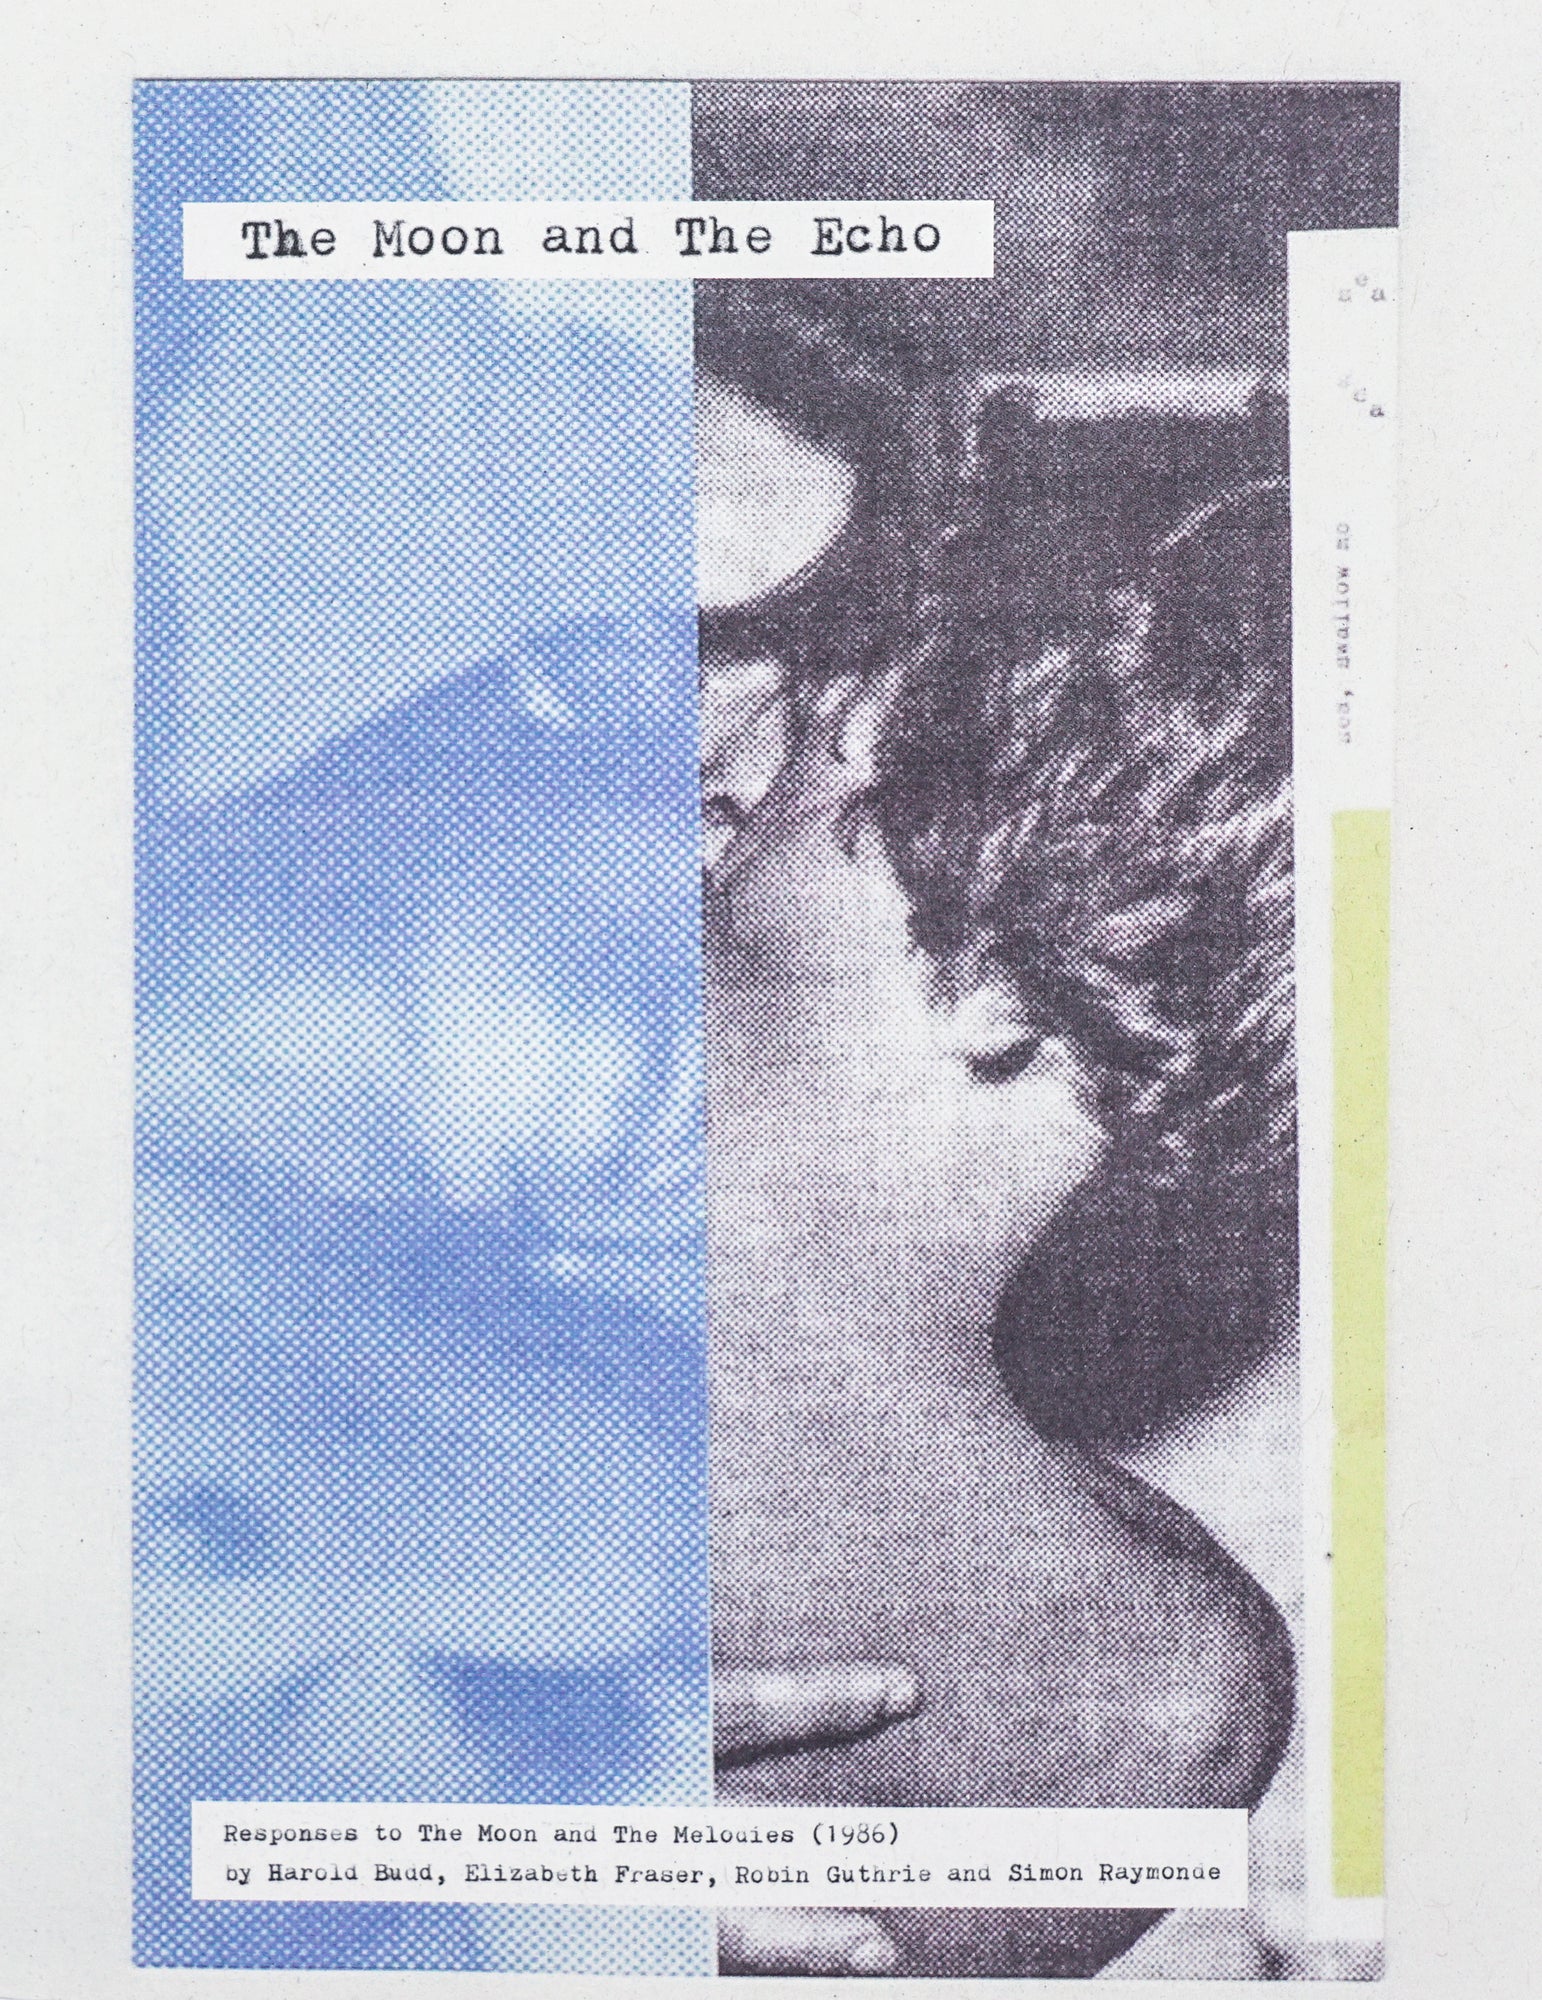 To the Moon and The Echo in black serif type over a screen printed photocollage in blue back yellow and white